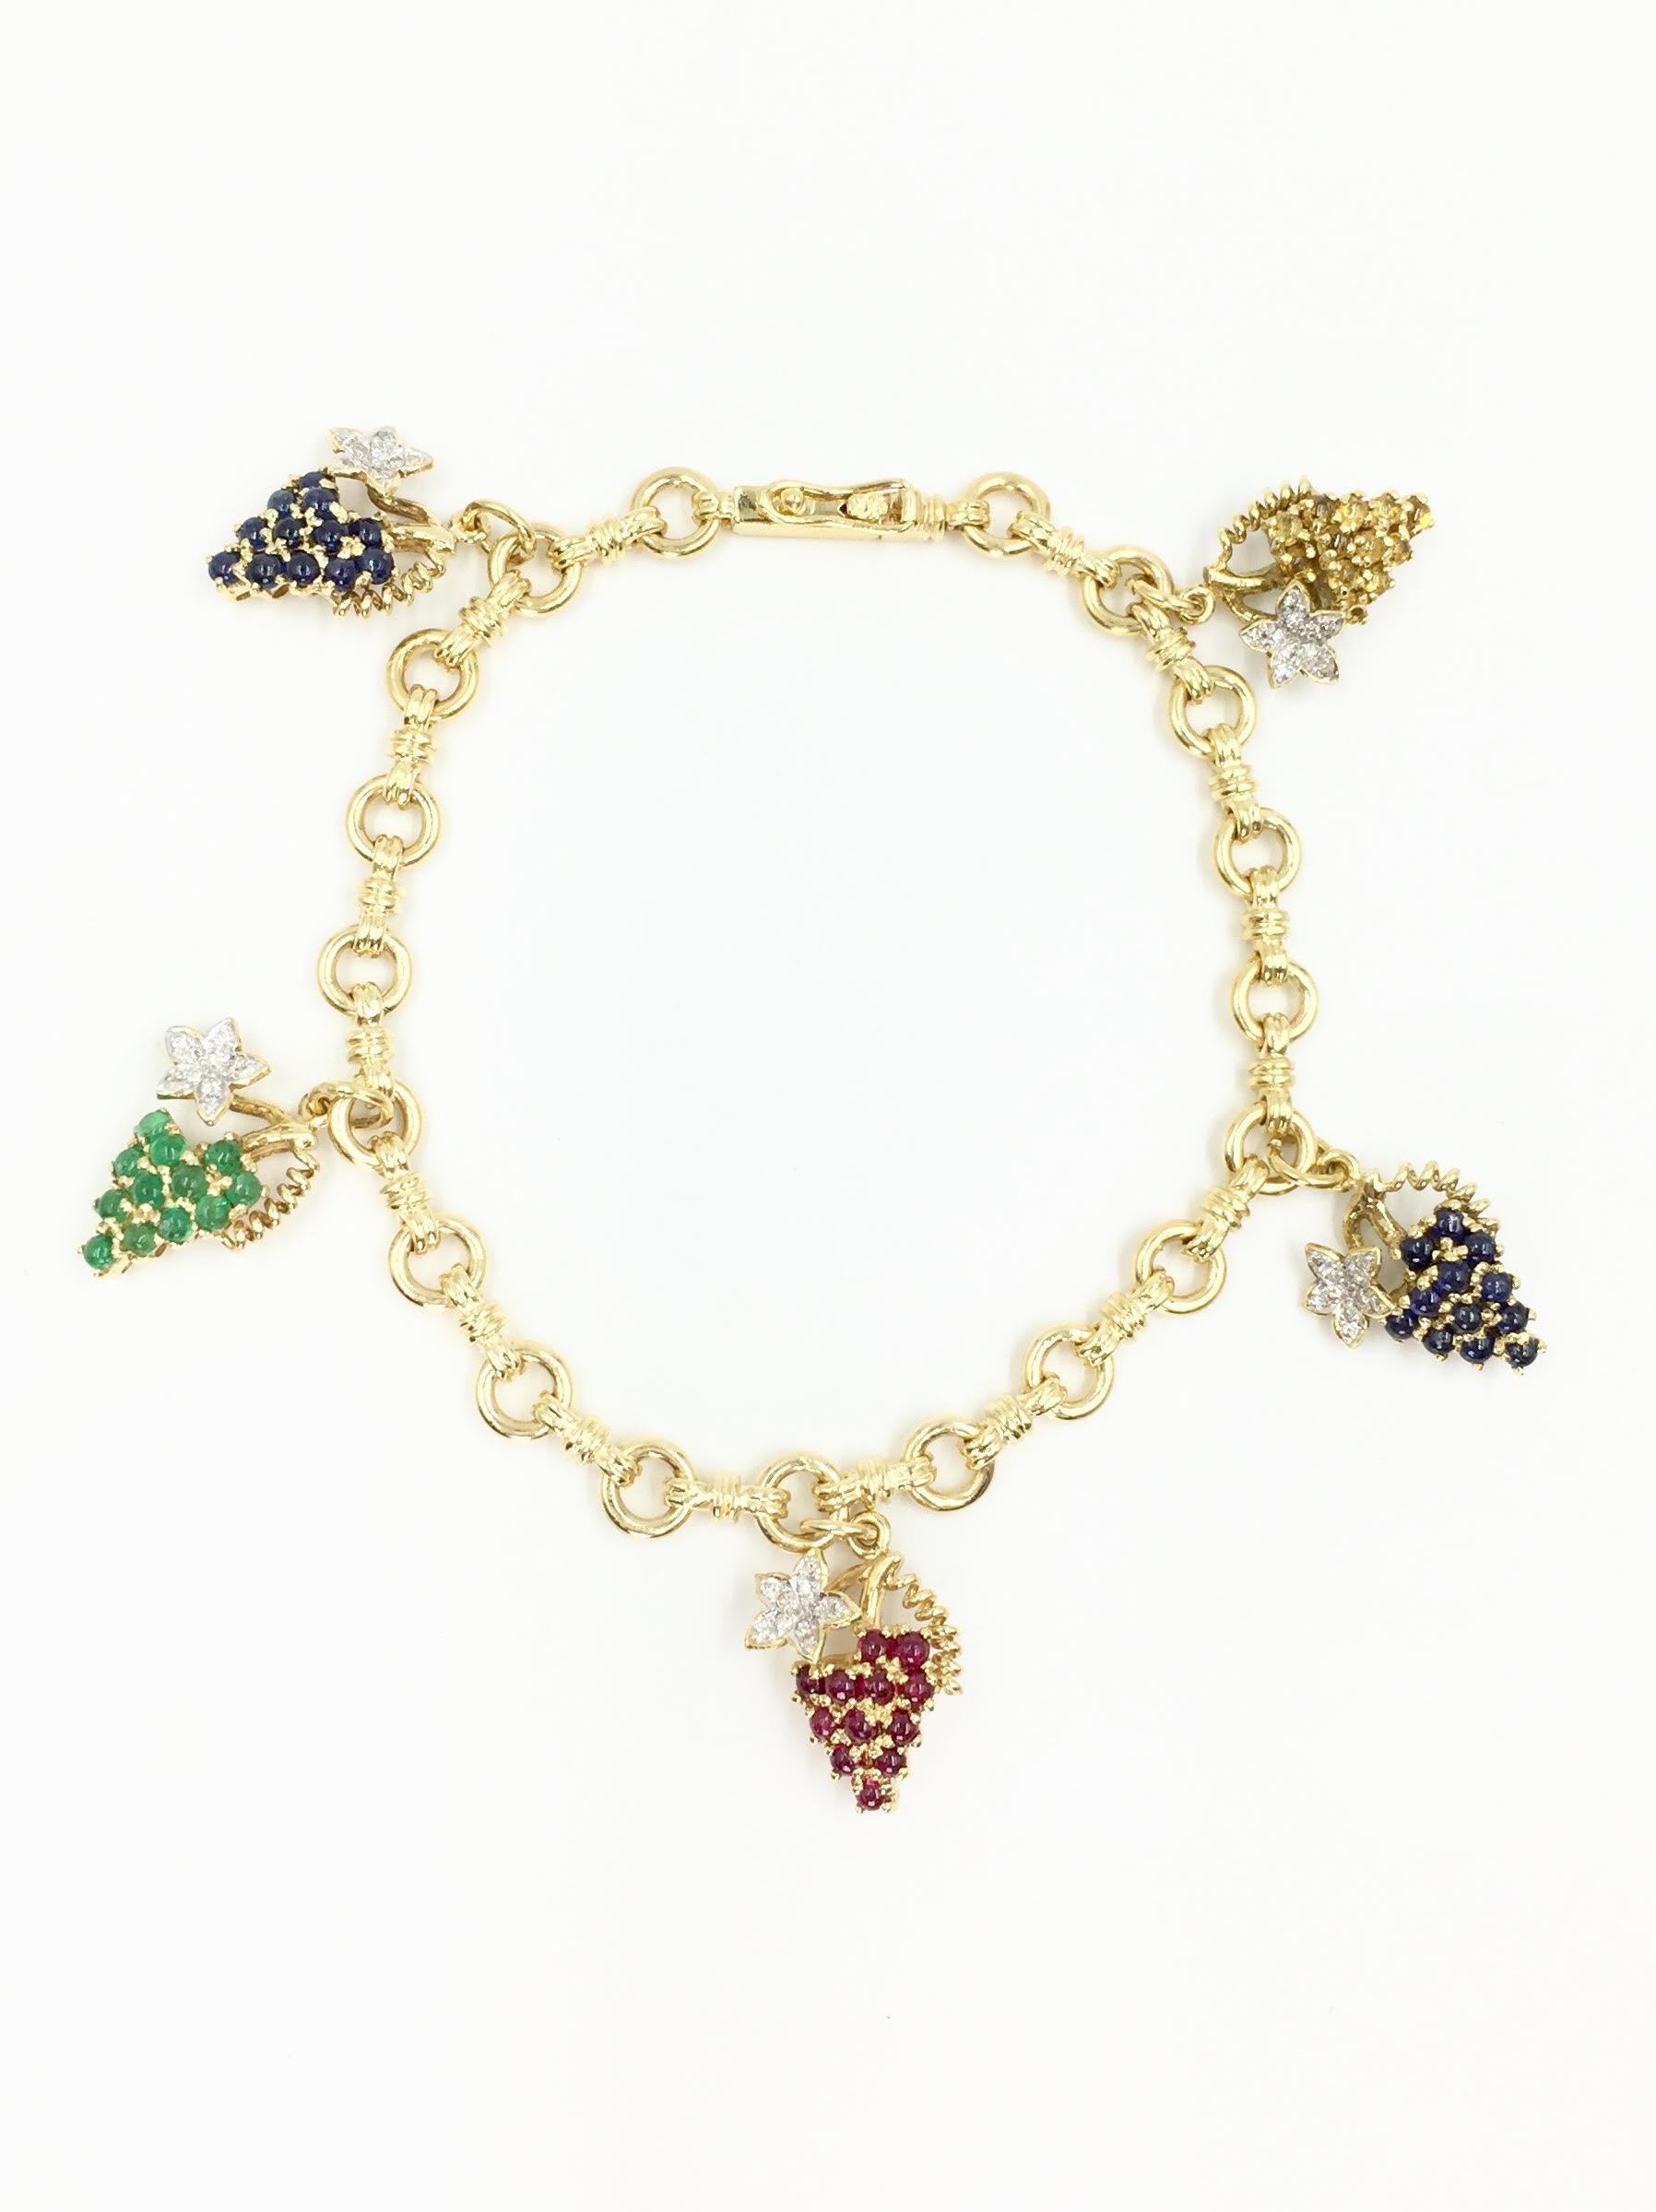 18 Karat solid gold linked charm bracelet featuring five diamond and precious gemstone dangling grape charms. Charms have a total weight of .21 carats of diamonds at approximately F color, VS2 clarity. 1.40 carats of blue sapphires, 1.06 carats of